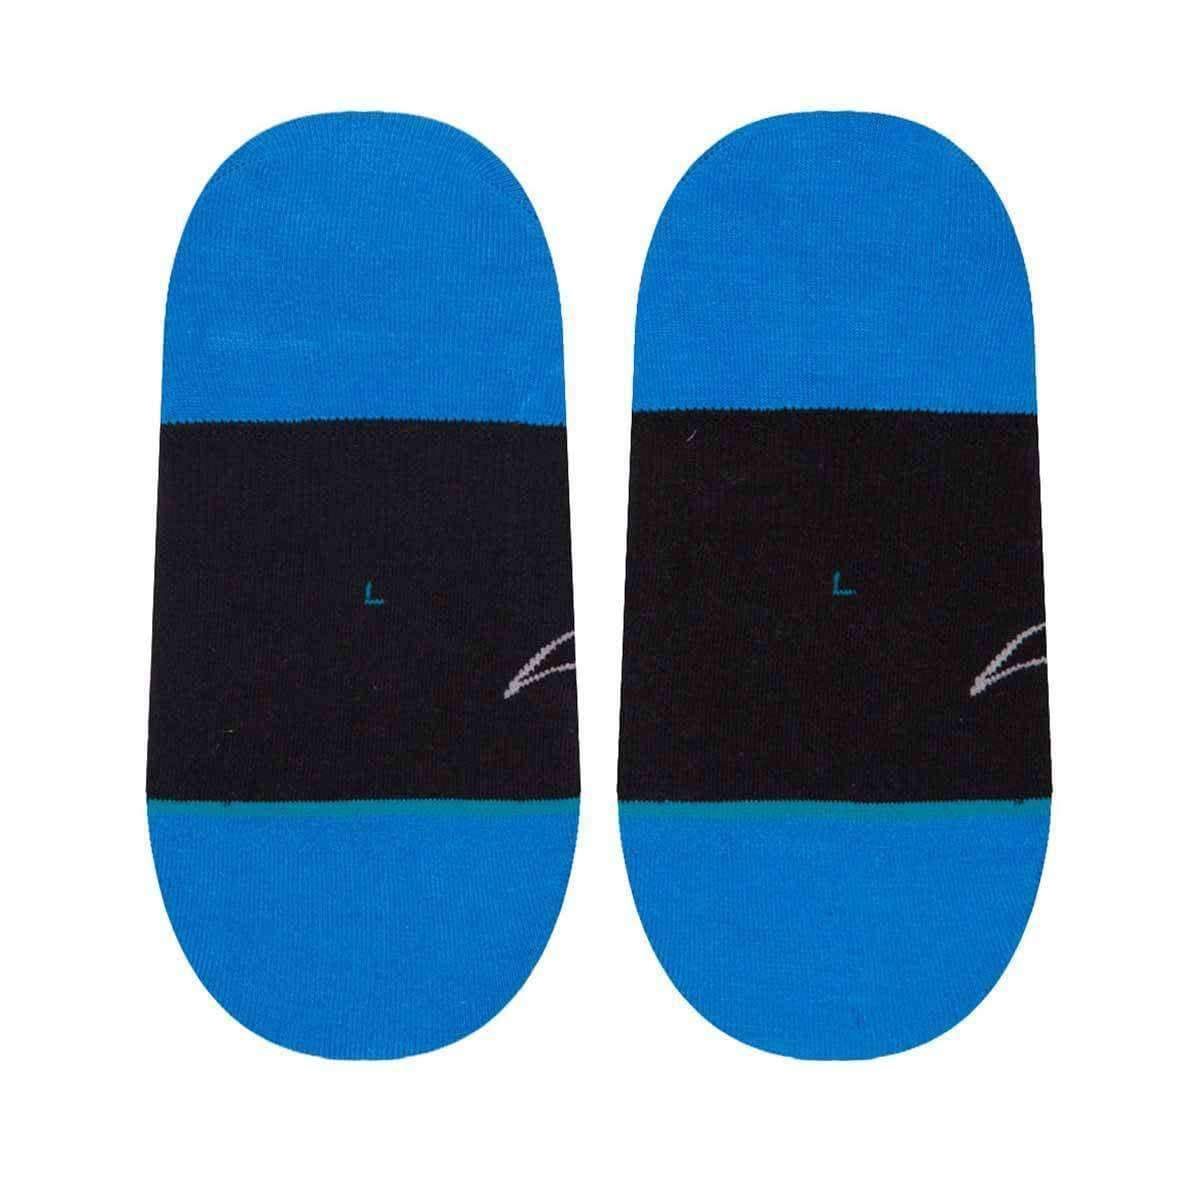 Stance NBA Arena Magic Invisible Low Socks Mens Low/Ankle Socks by Stance